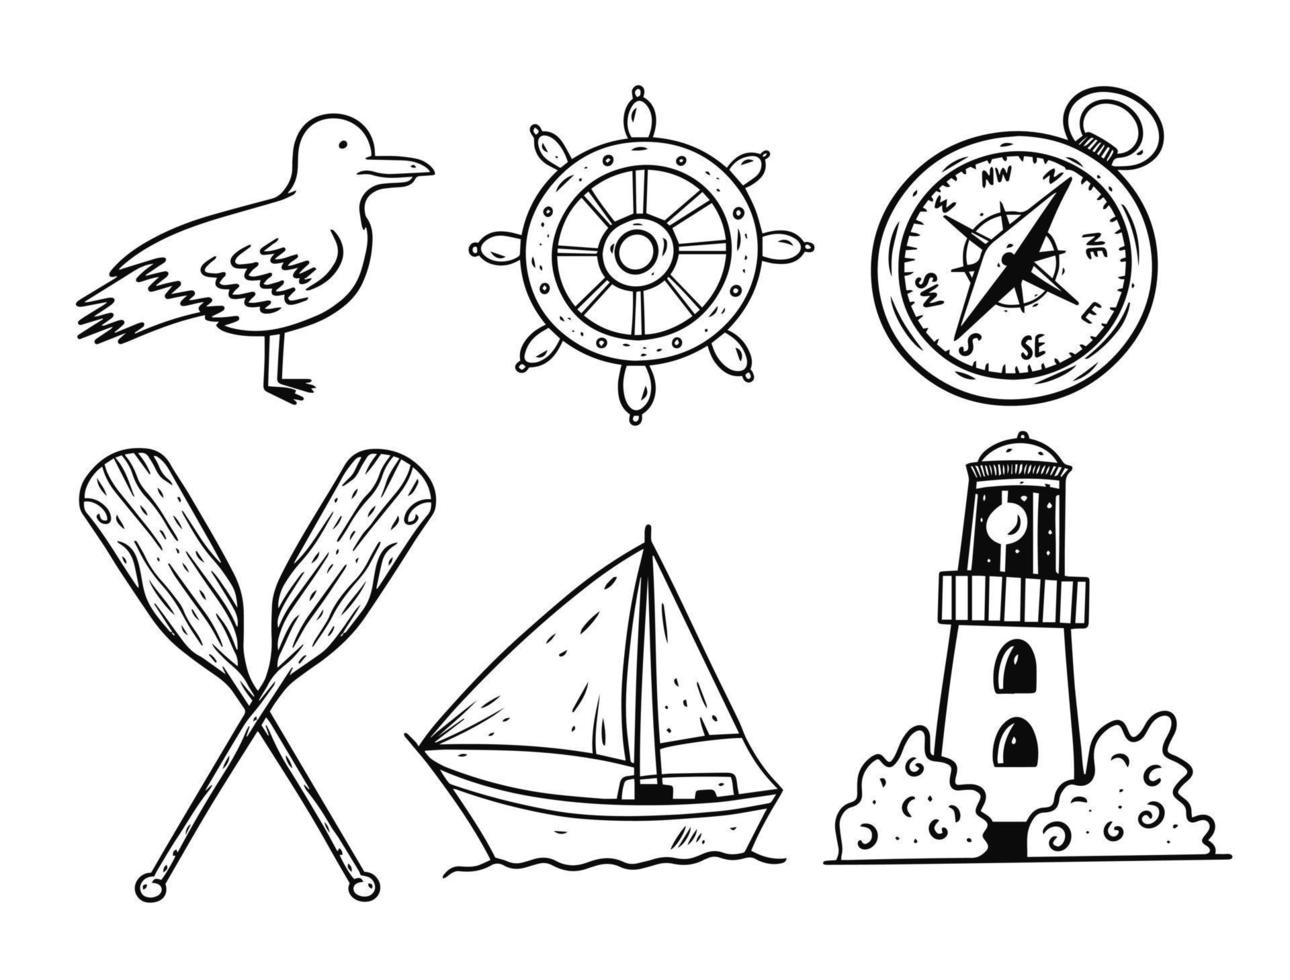 Graphic style doodle sea objects set. Black ink vector illustration.